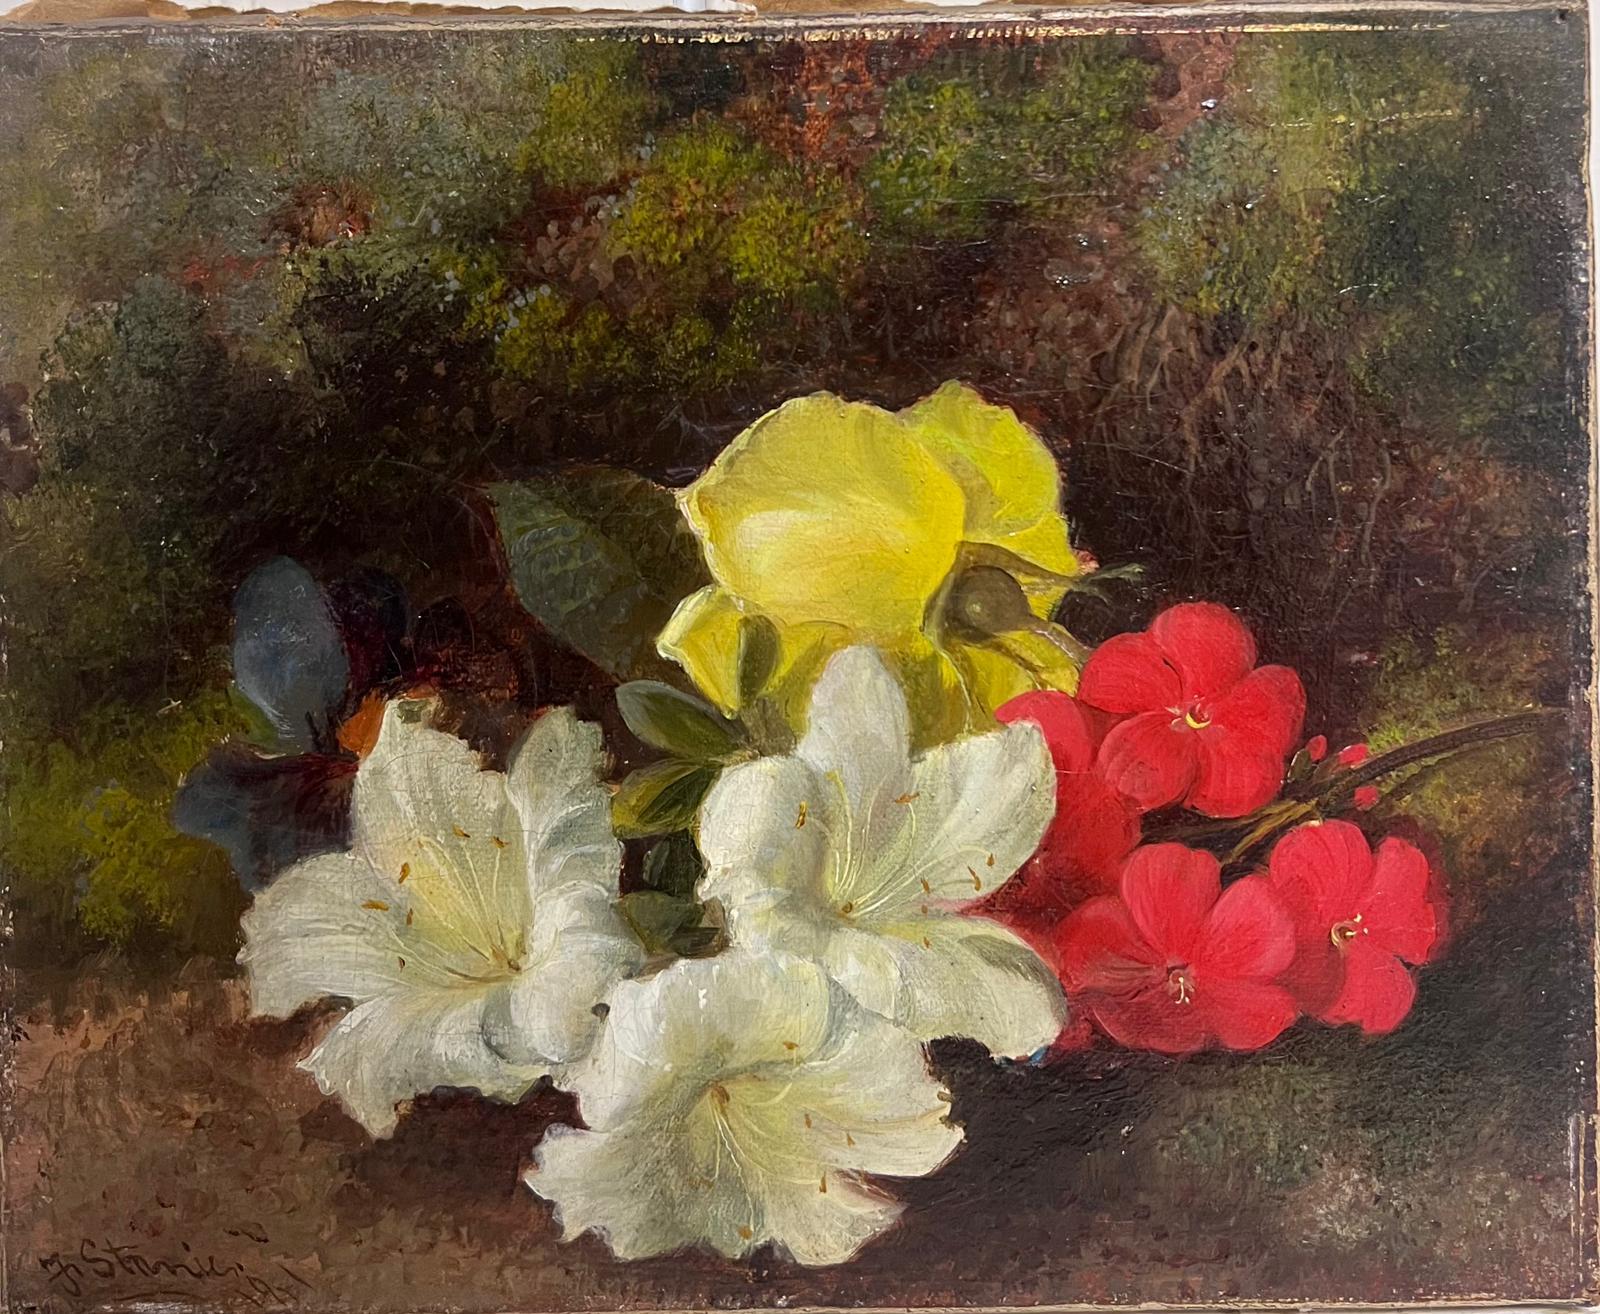 Charming Victorian English Still Life Oil Painting Flowers in Natural Setting For Sale 4